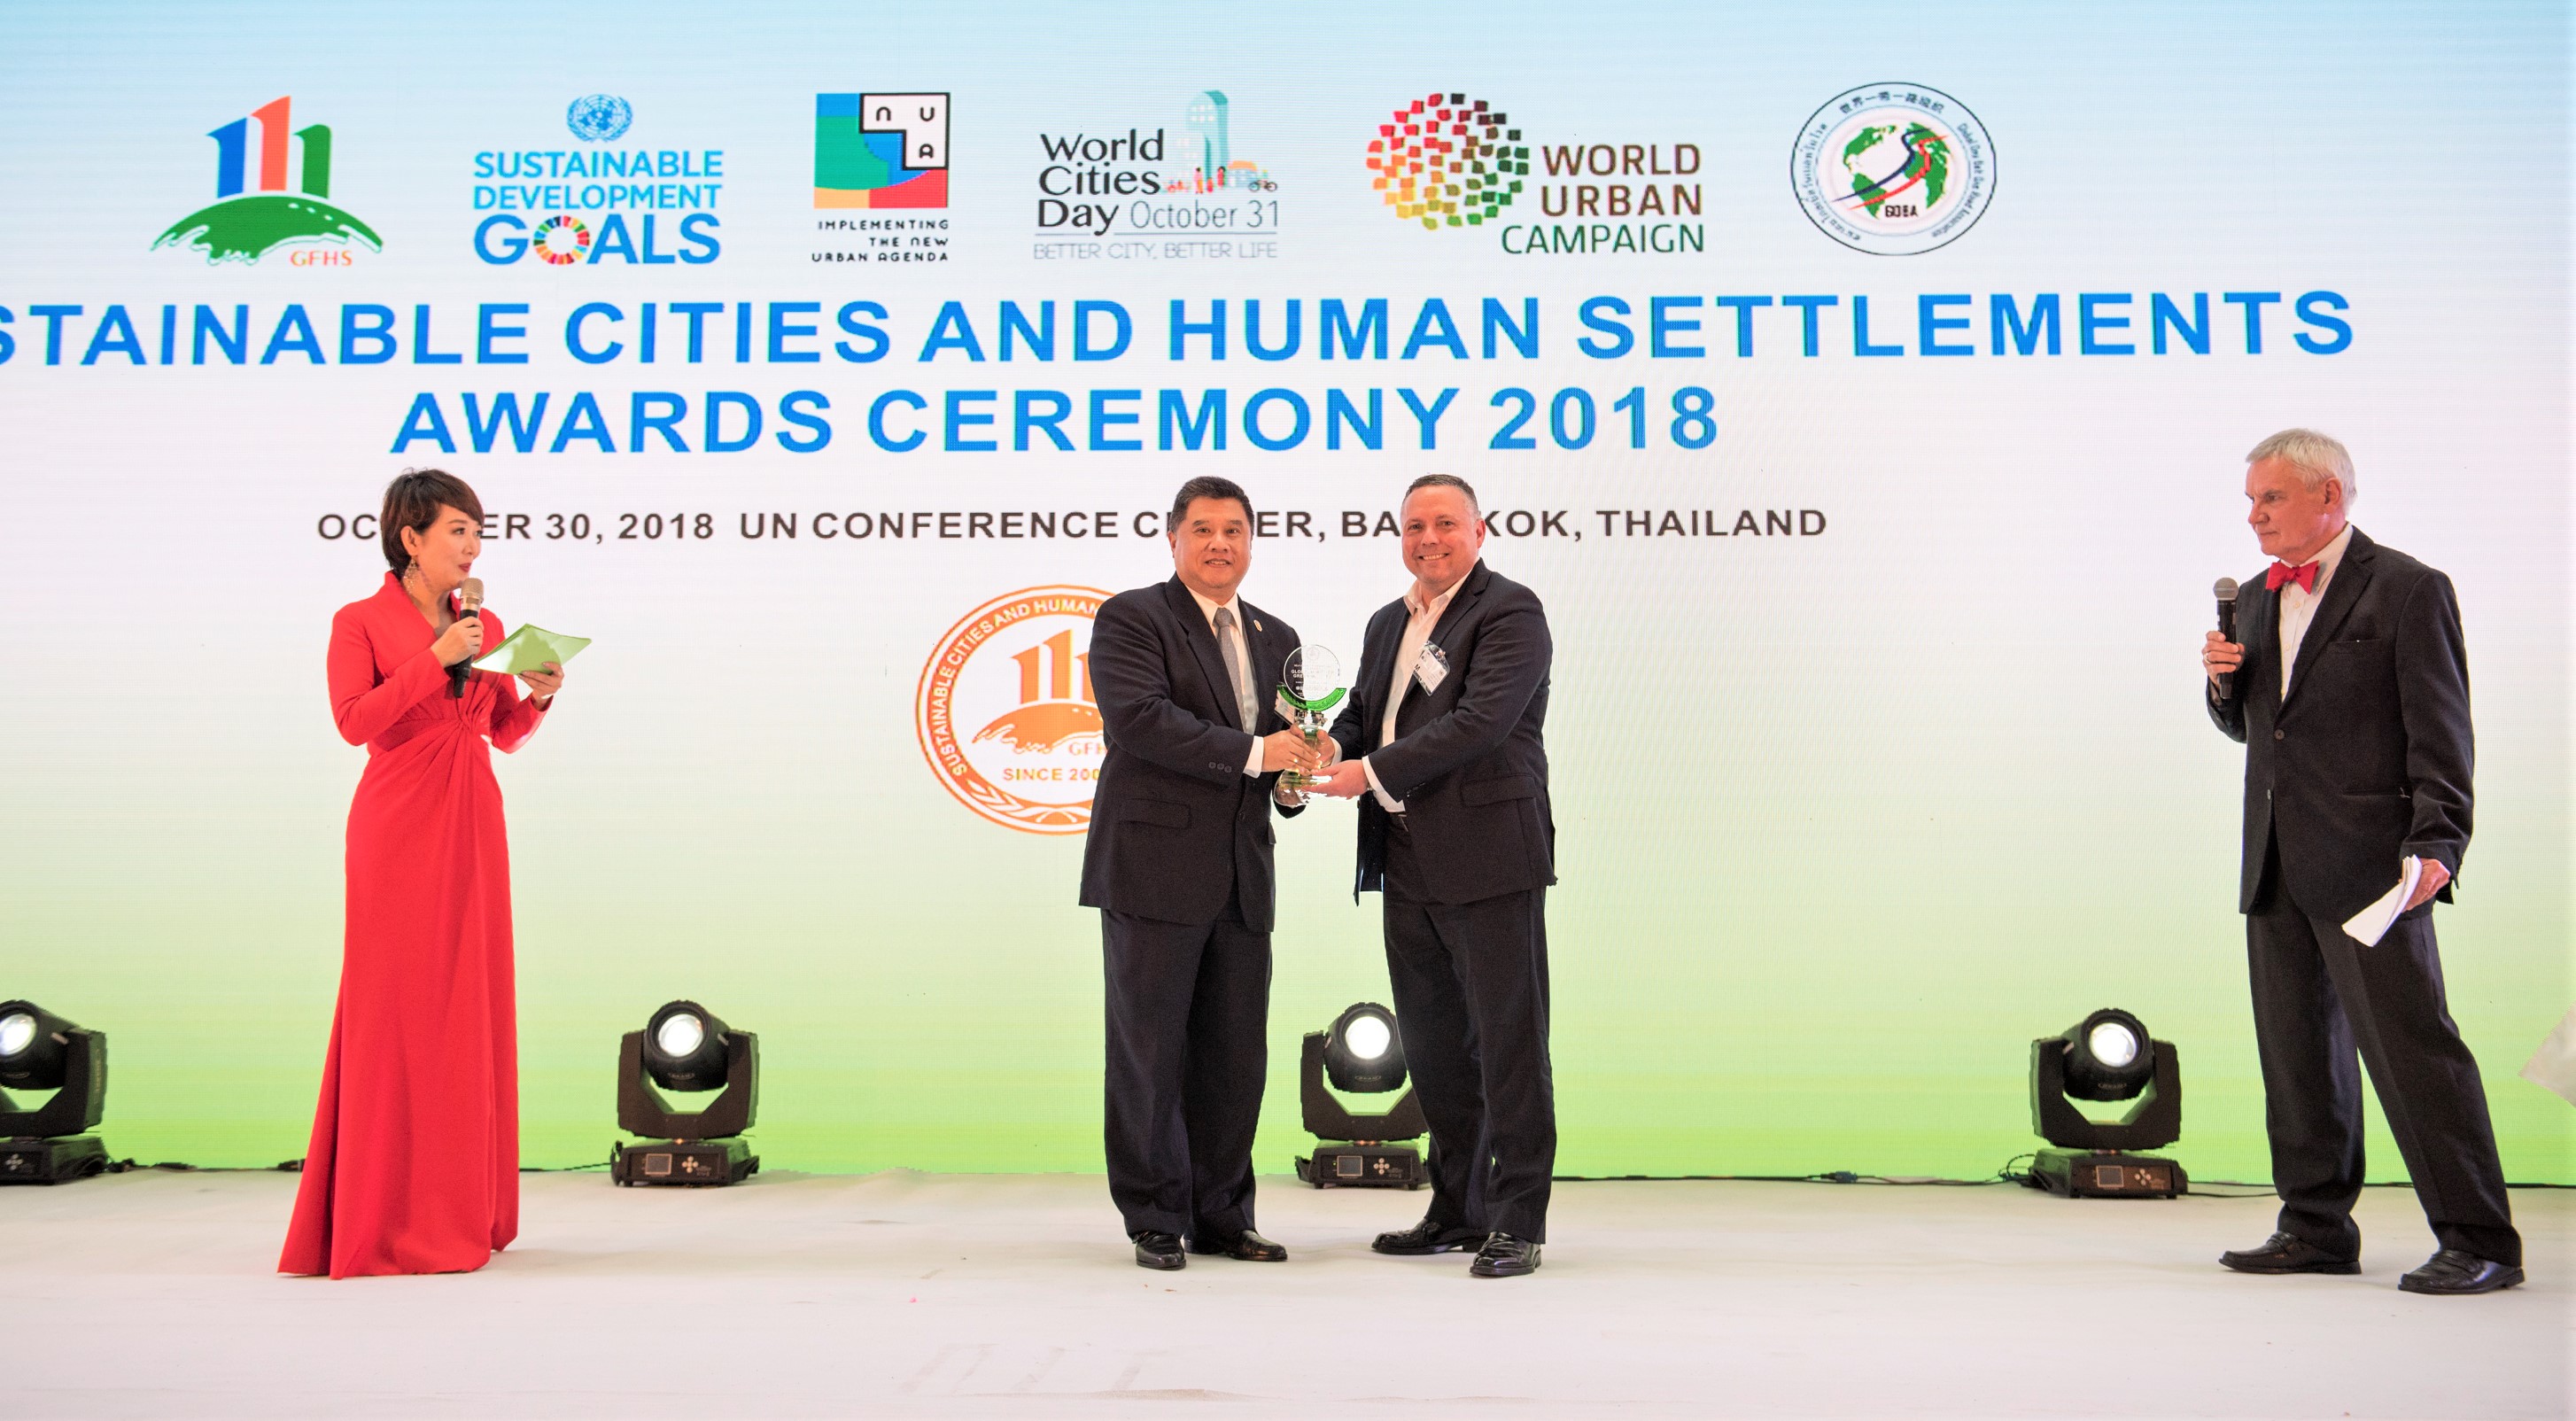 Coast Chairman and CEO David M. Hickey receives the Global Model of Green Mobility Award at the United Nations Conference Center, Bangkok, Thailand.